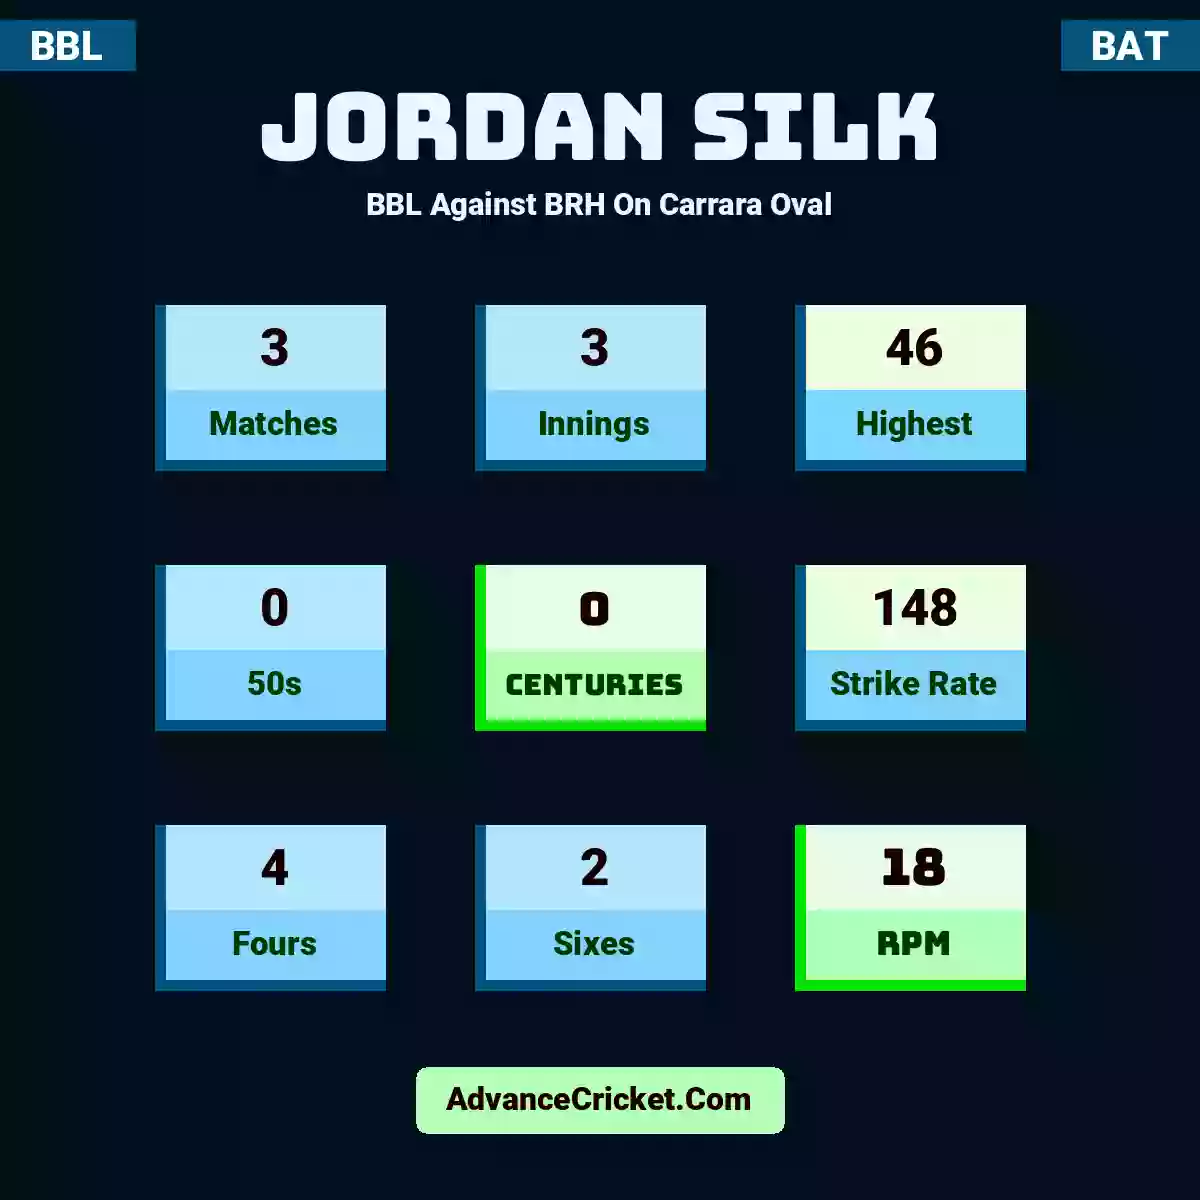 Jordan Silk BBL  Against BRH On Carrara Oval, Jordan Silk played 3 matches, scored 46 runs as highest, 0 half-centuries, and 0 centuries, with a strike rate of 148. J.Silk hit 4 fours and 2 sixes, with an RPM of 18.